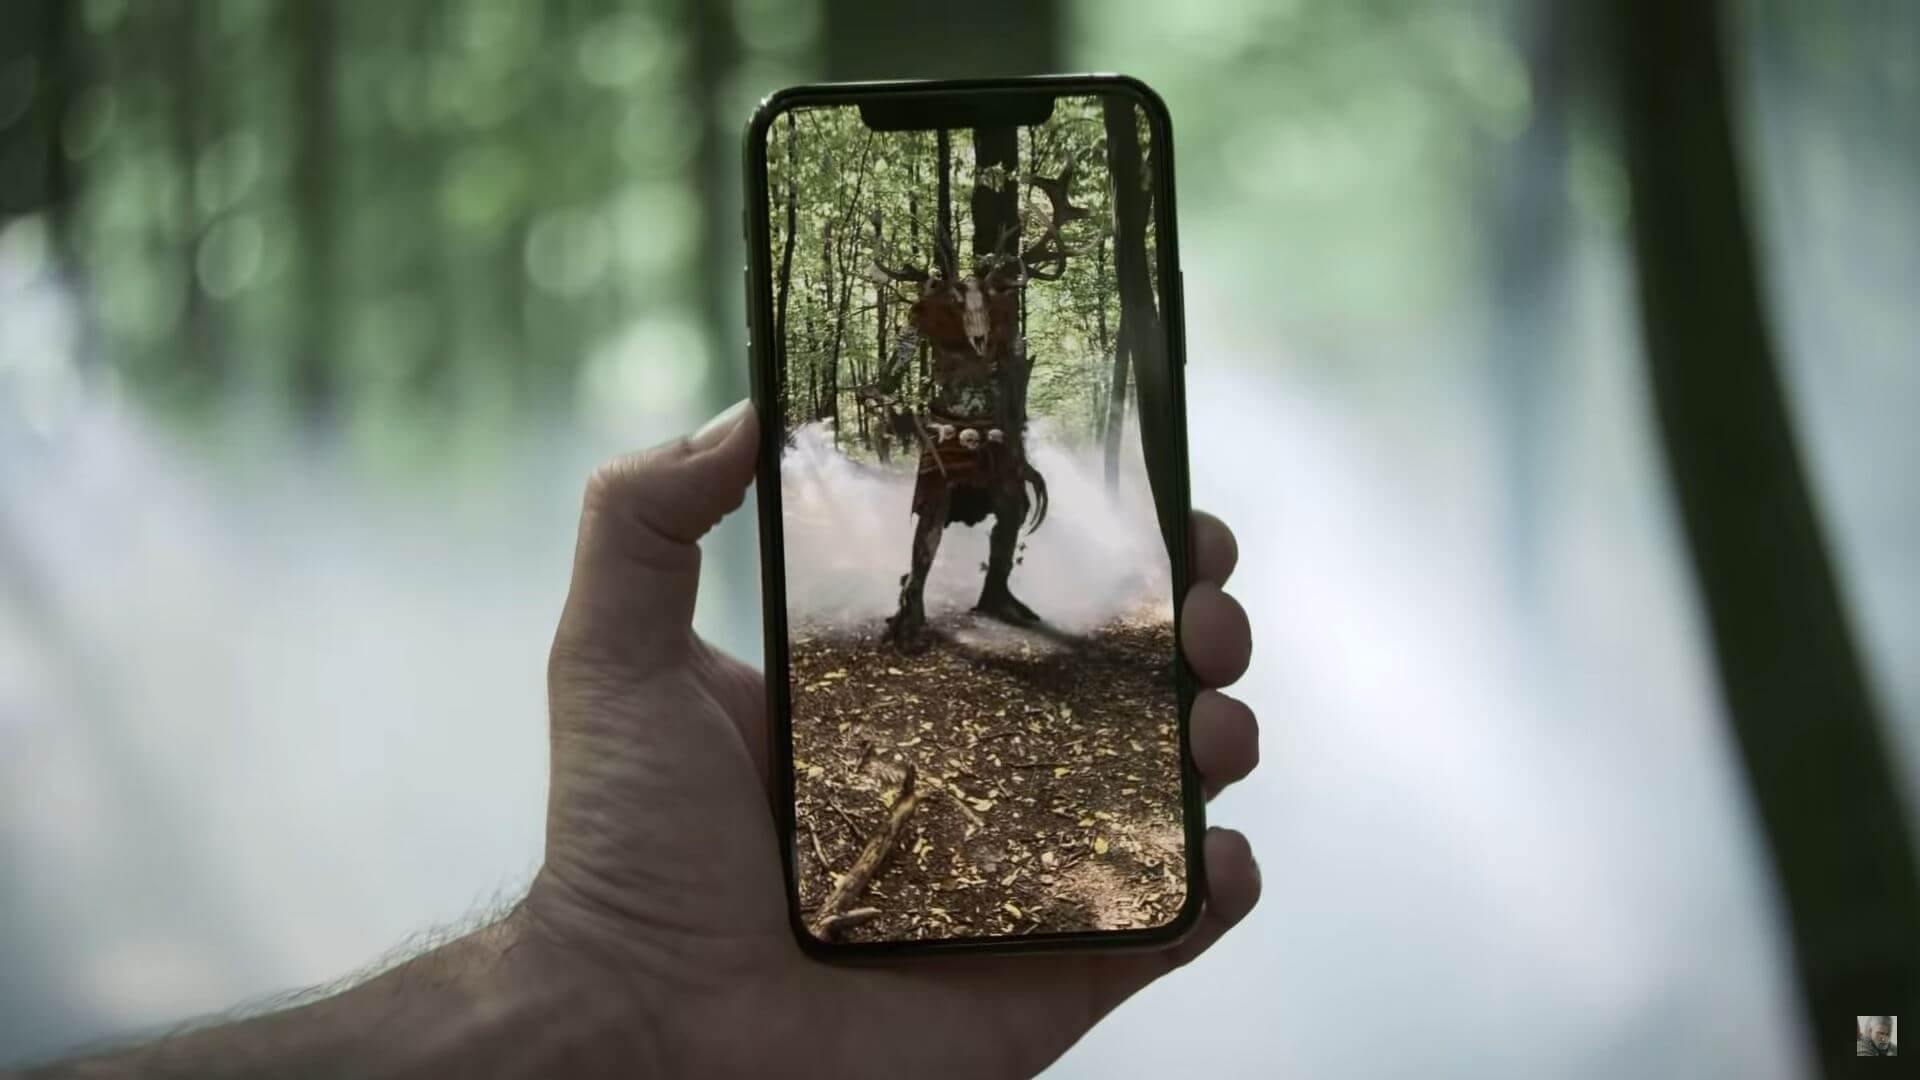 A player holding their phone up to a monster in The Witcher: Monster Slayer